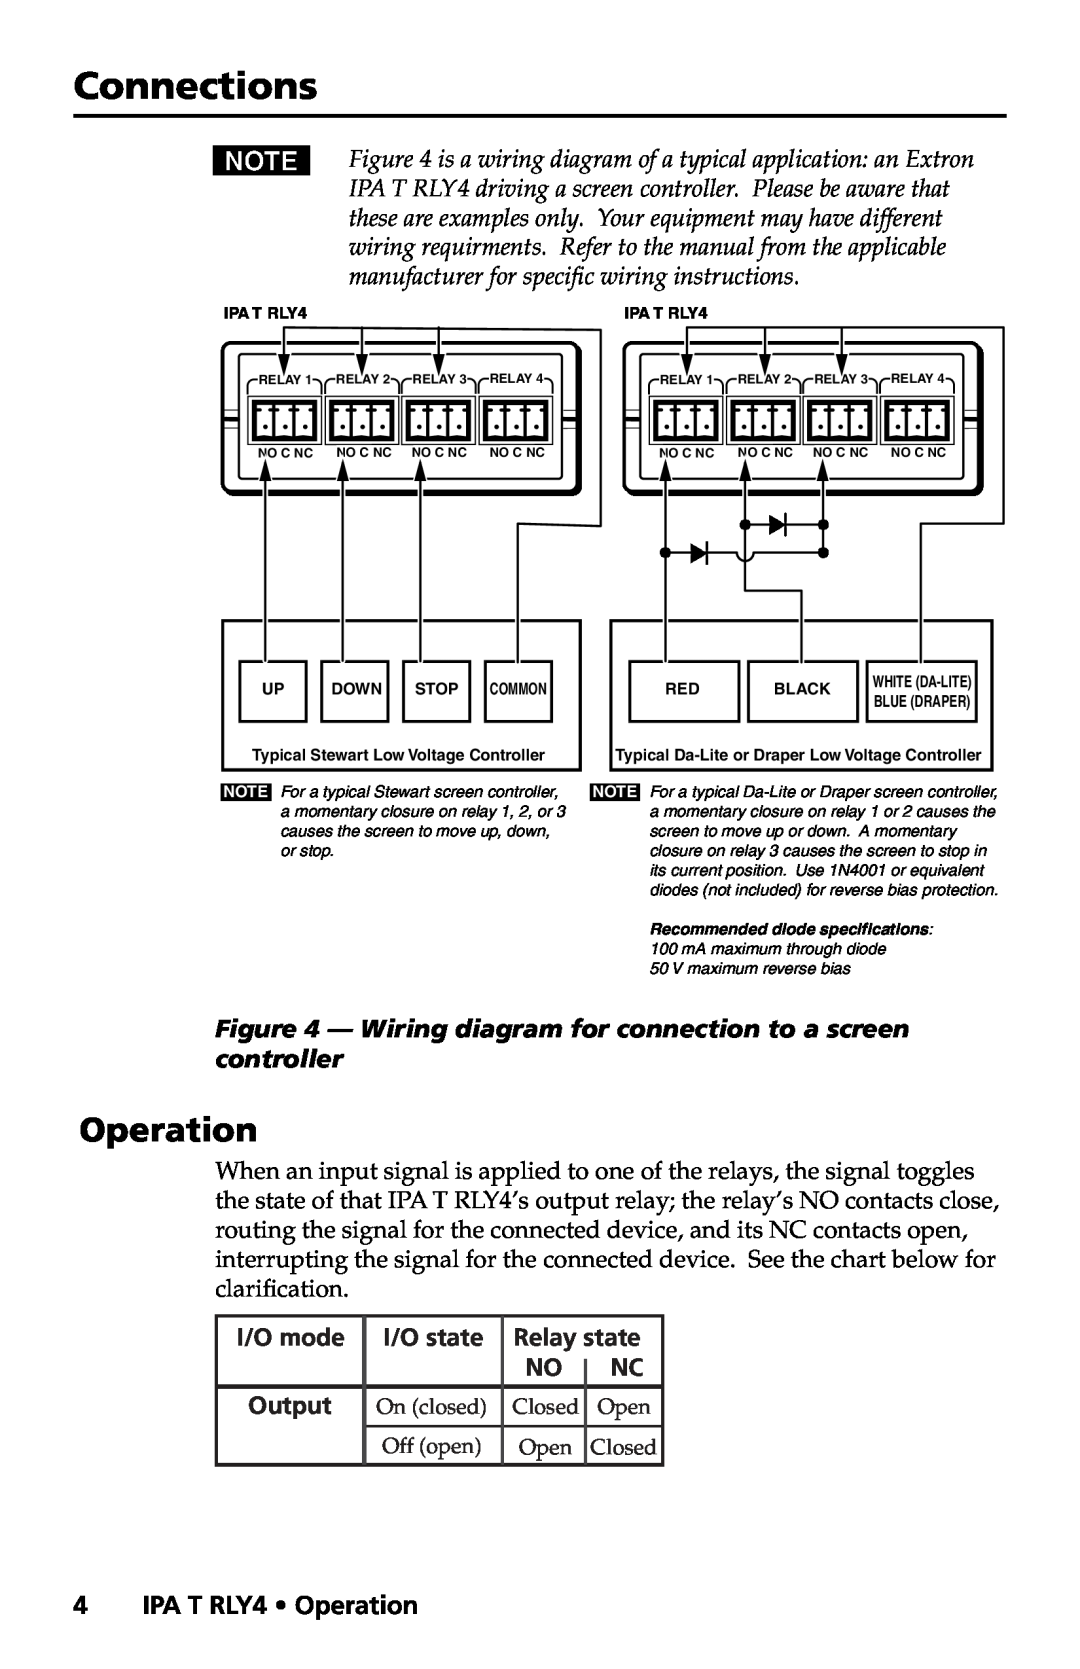 Extron electronic IPA T RLY4 Operation, Wiring diagram for connection to a screen controller, Connections, I/O mode 